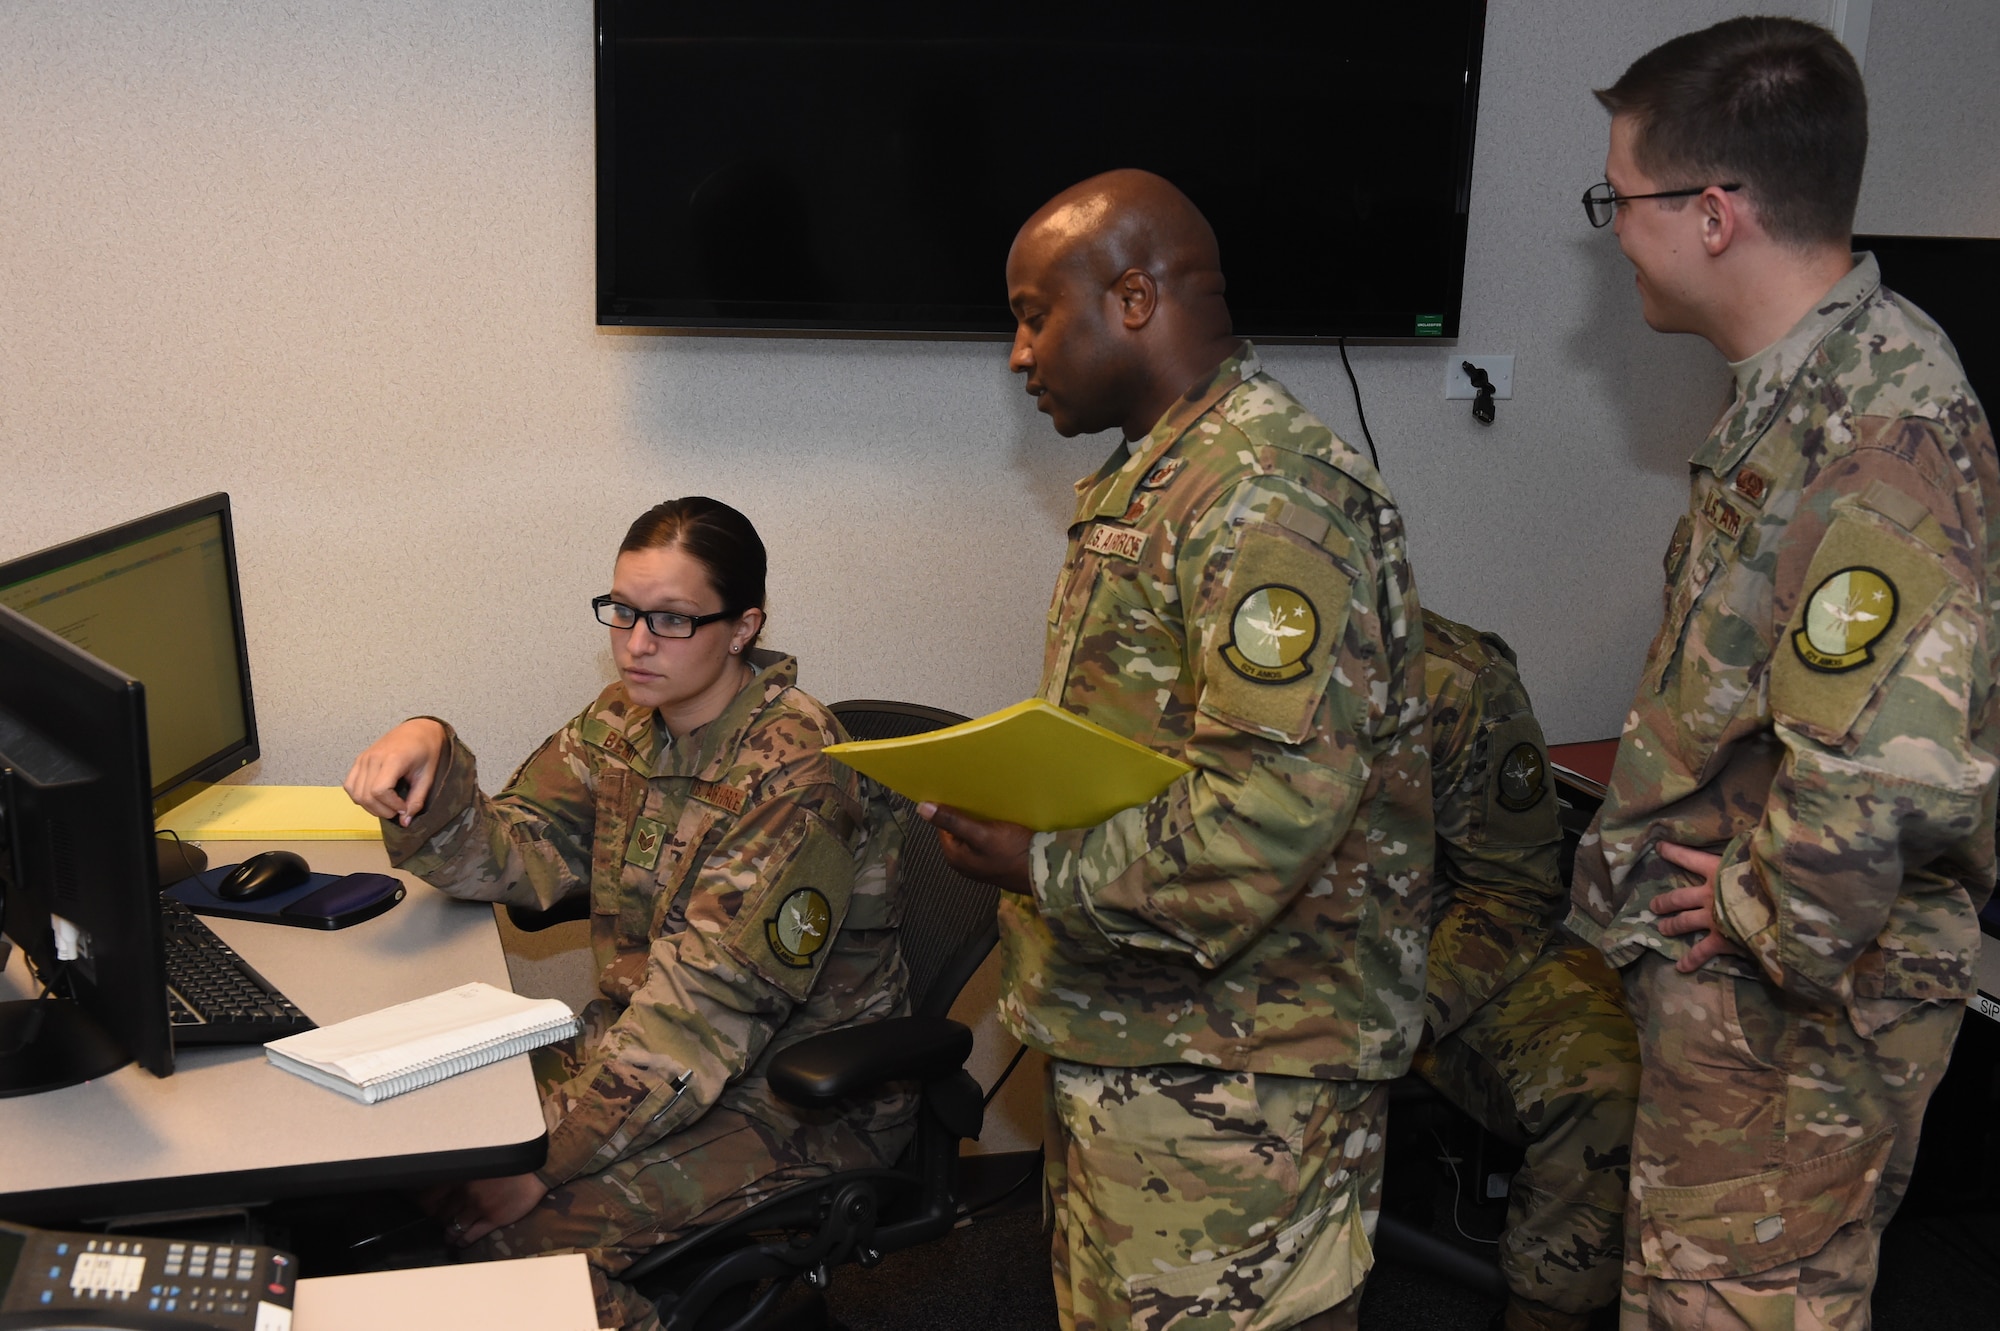 Airmen from the 321st, 621st and 514th Air Mobility Operations Squadrons provided temporary remote Command and Control functions for the Hurricane Michael relief effort here, Oct. 12, 2018. This total force team stood up an Air Mobility Division for the 601st Air Operations Center during its re-location from Tyndall Air Force Base, Fla., after Hurricane Michael destroyed their facilities. (U.S. Air Force Photo by Master Sgt. Charles Larkin Sr.)